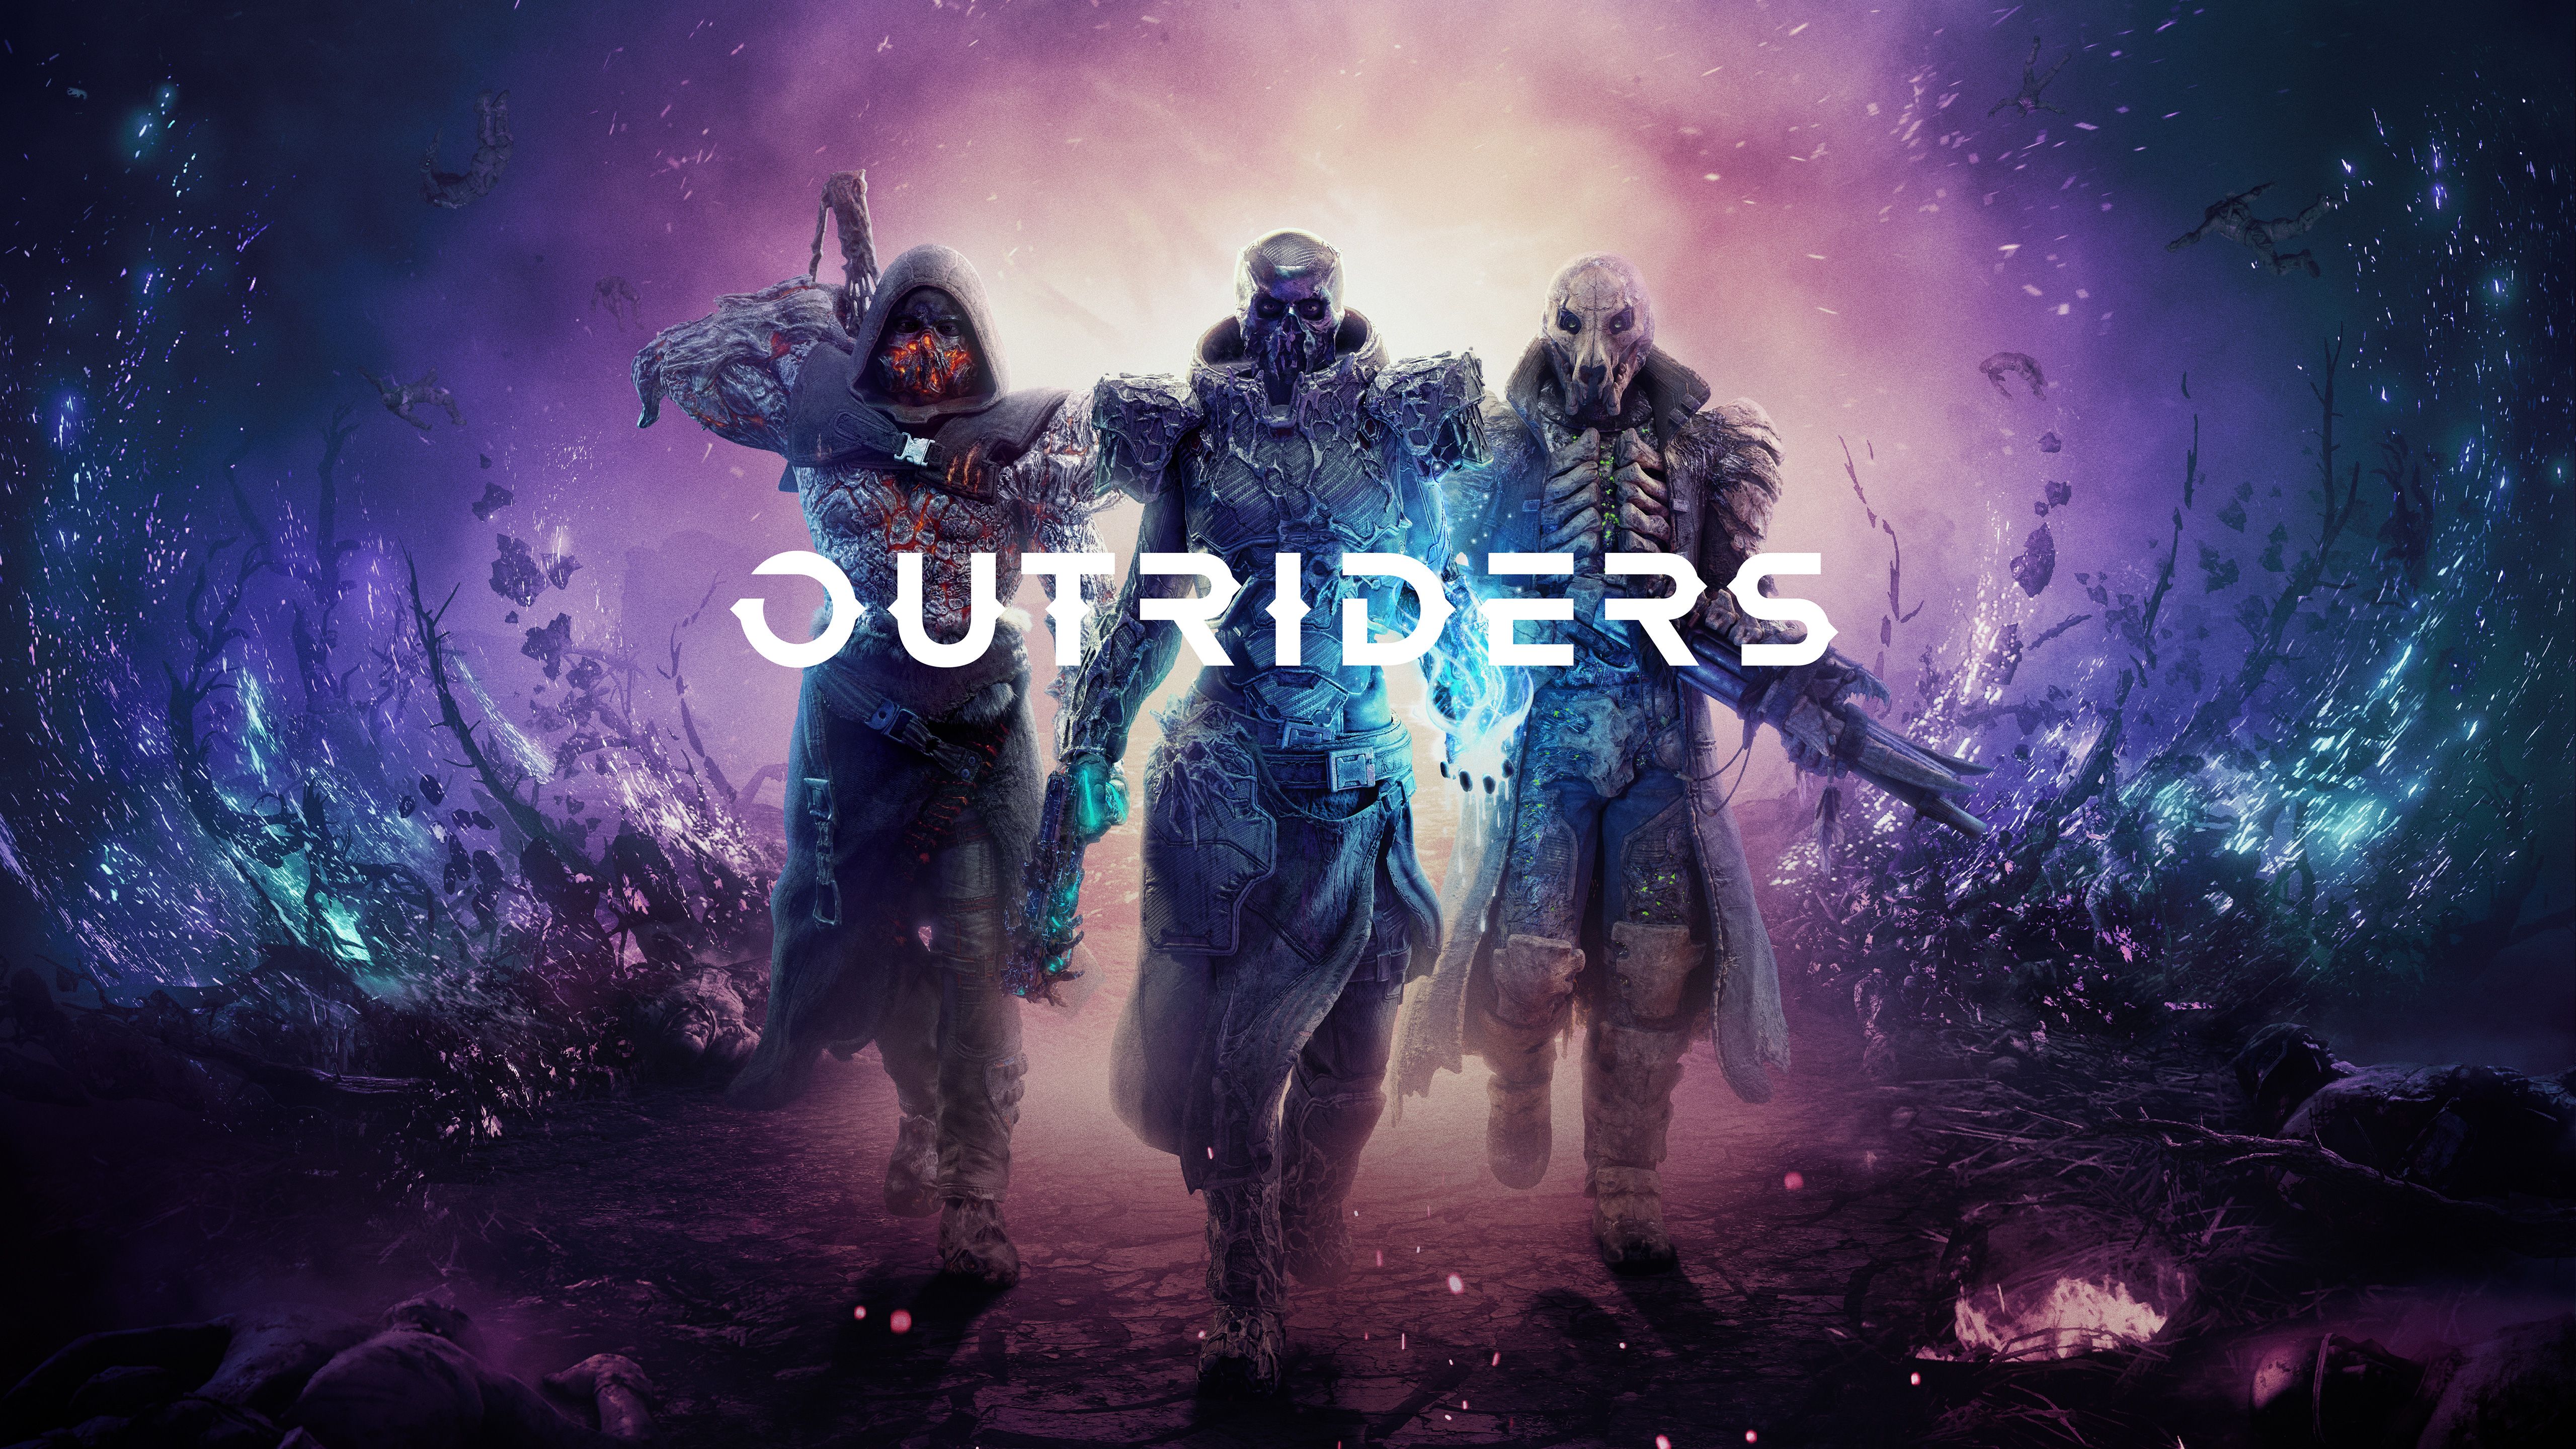 Outriders 2020 Game 4K 5K Wallpaper